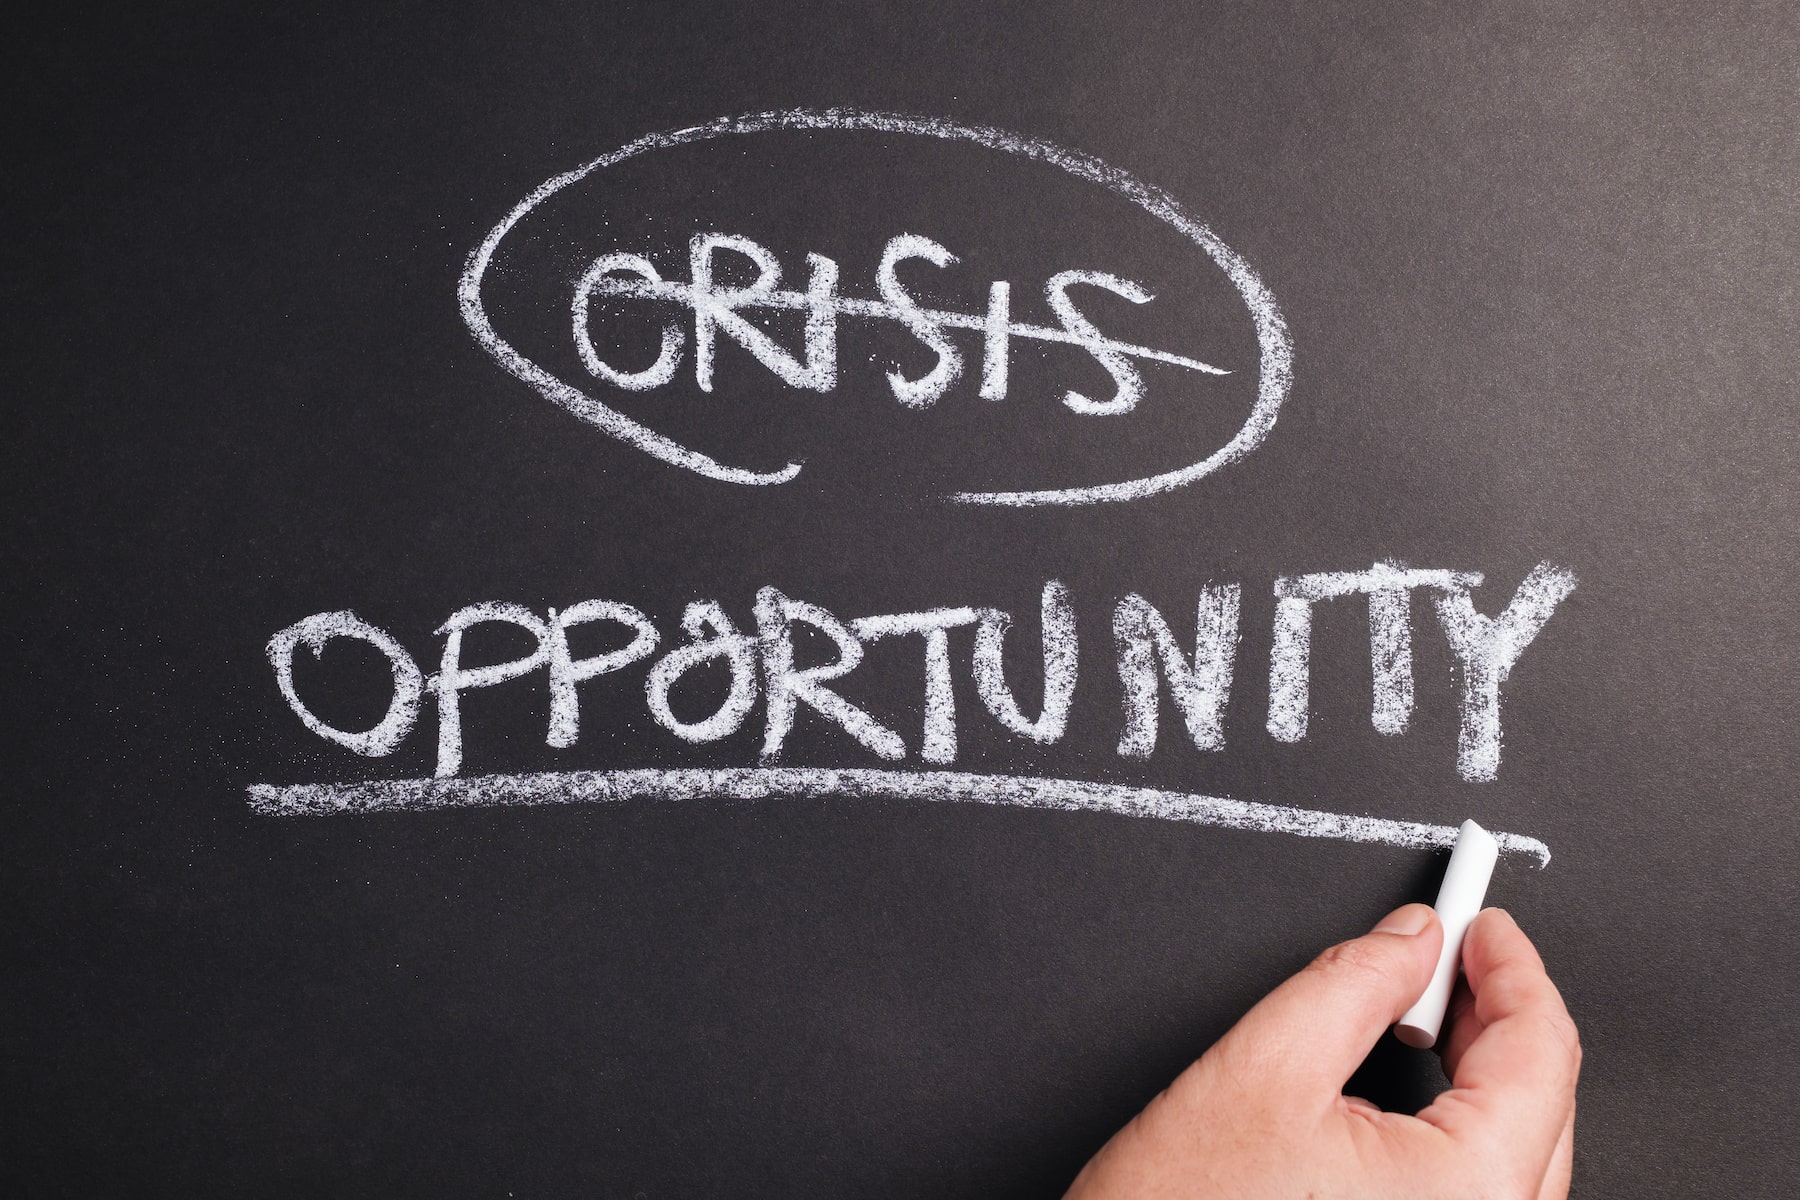 Chalk board with crisis and opportunity written on it